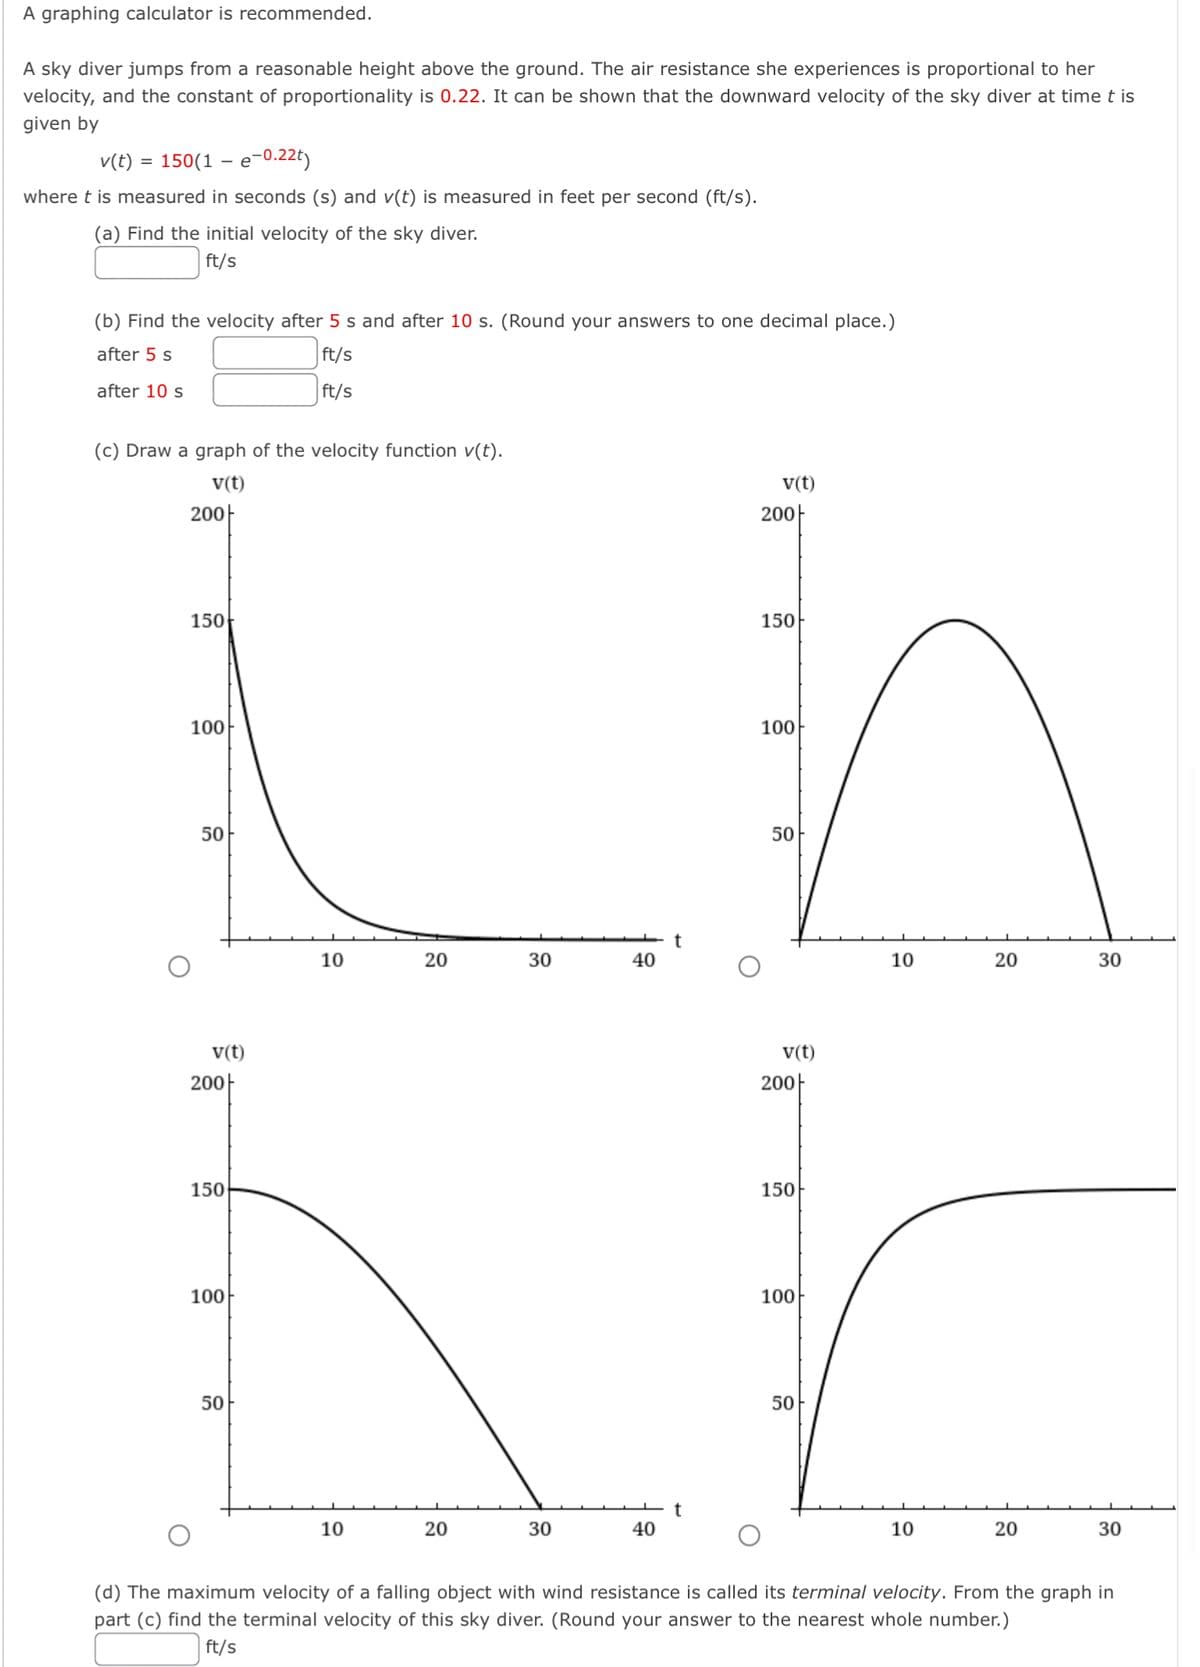 A graphing calculator is recommended.
A sky diver jumps from a reasonable height above the ground. The air resistance she experiences is proportional to her
velocity, and the constant of proportionality is 0.22. It can be shown that the downward velocity of the sky diver at time t is
given by
v(t) = 150(1e-0.22t)
where t is measured in seconds (s) and v(t) is measured in feet per second (ft/s).
(a) Find the initial velocity of the sky diver.
ft/s
(b) Find the velocity after 5 s and after 10 s. (Round your answers to one decimal place.)
after 5 s
ft/s
ft/s
after 10 s
(c) Draw a graph of the velocity function v(t).
v(t)
200
150
100
50
v(t)
200
150
100
50
10
10
20
20
30
30
40
t
40
v(t)
200
150
100
50
10
20
10
v(t)
200
150
L
100
50
30
20
30
(d) The maximum velocity of a falling object with wind resistance is called its terminal velocity. From the graph in
part (c) find the terminal velocity of this sky diver. (Round your answer to the nearest whole number.)
ft/s